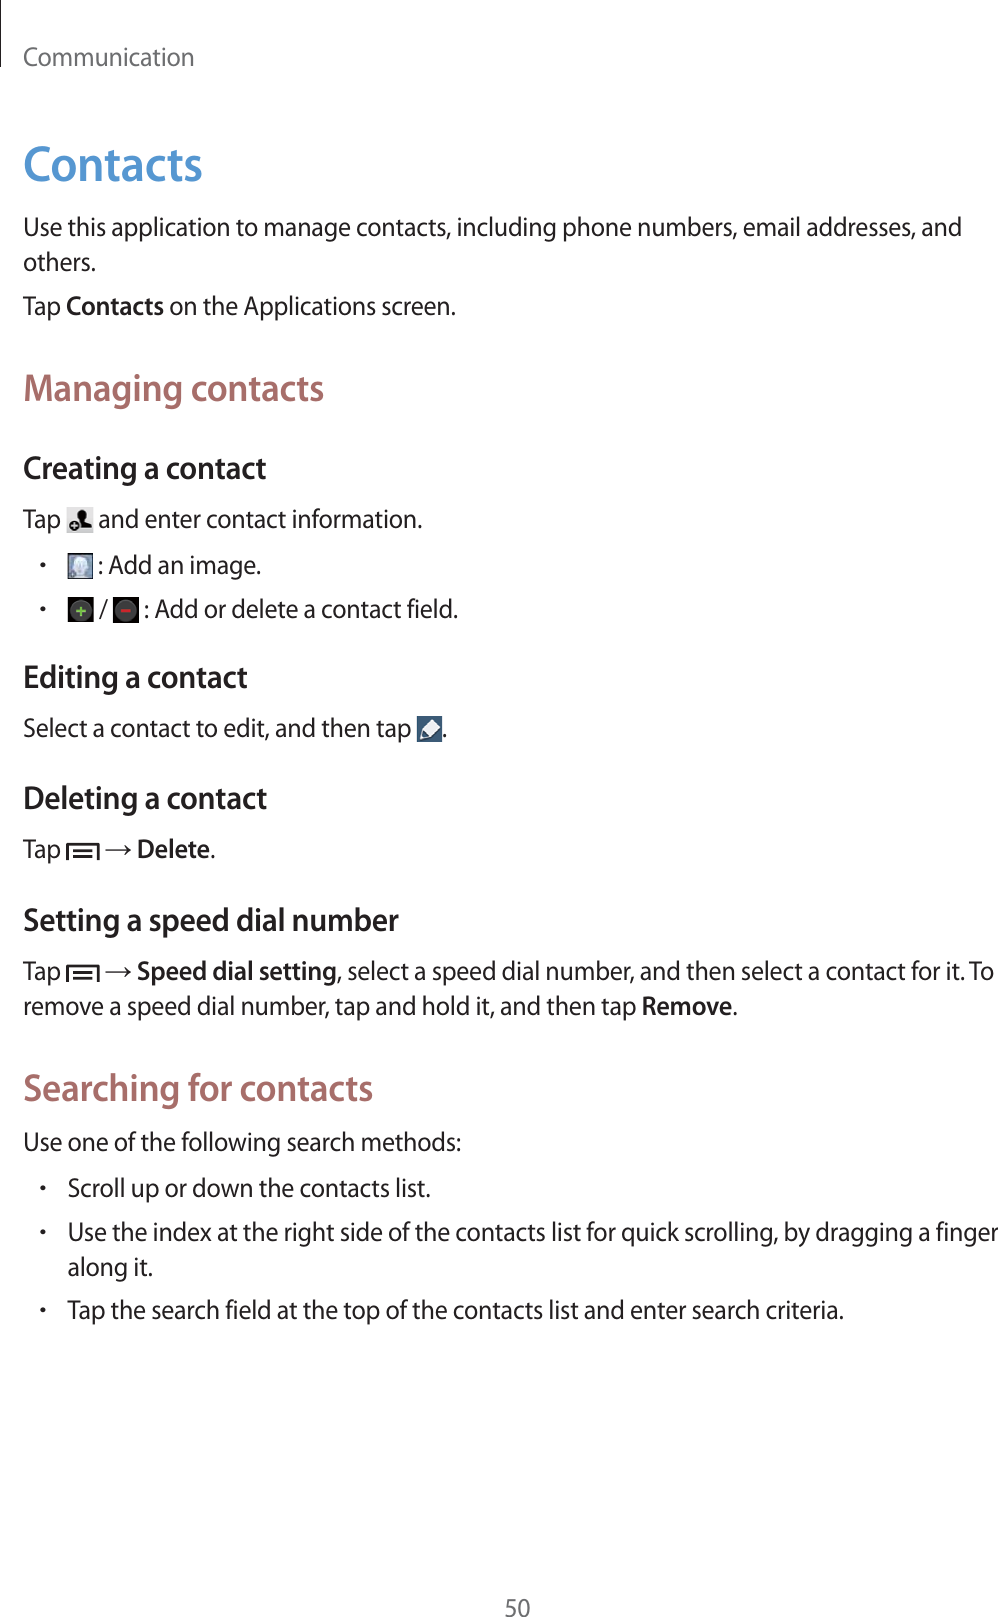 Communication50ContactsUse this application to manage contacts, including phone numbers, email addresses, and others.Tap Contacts on the Applications screen.Managing contactsCreating a contactTap   and enter contact information.r : Add an image.r /  : Add or delete a contact field.Editing a contactSelect a contact to edit, and then tap  .Deleting a contactTap    Delete.Setting a speed dial numberTap    Speed dial setting, select a speed dial number, and then select a contact for it. To remove a speed dial number, tap and hold it, and then tap Remove.Searching for contactsUse one of the following search methods:rScroll up or down the contacts list.rUse the index at the right side of the contacts list for quick scrolling, by dragging a finger along it.rTap the search field at the top of the contacts list and enter search criteria.